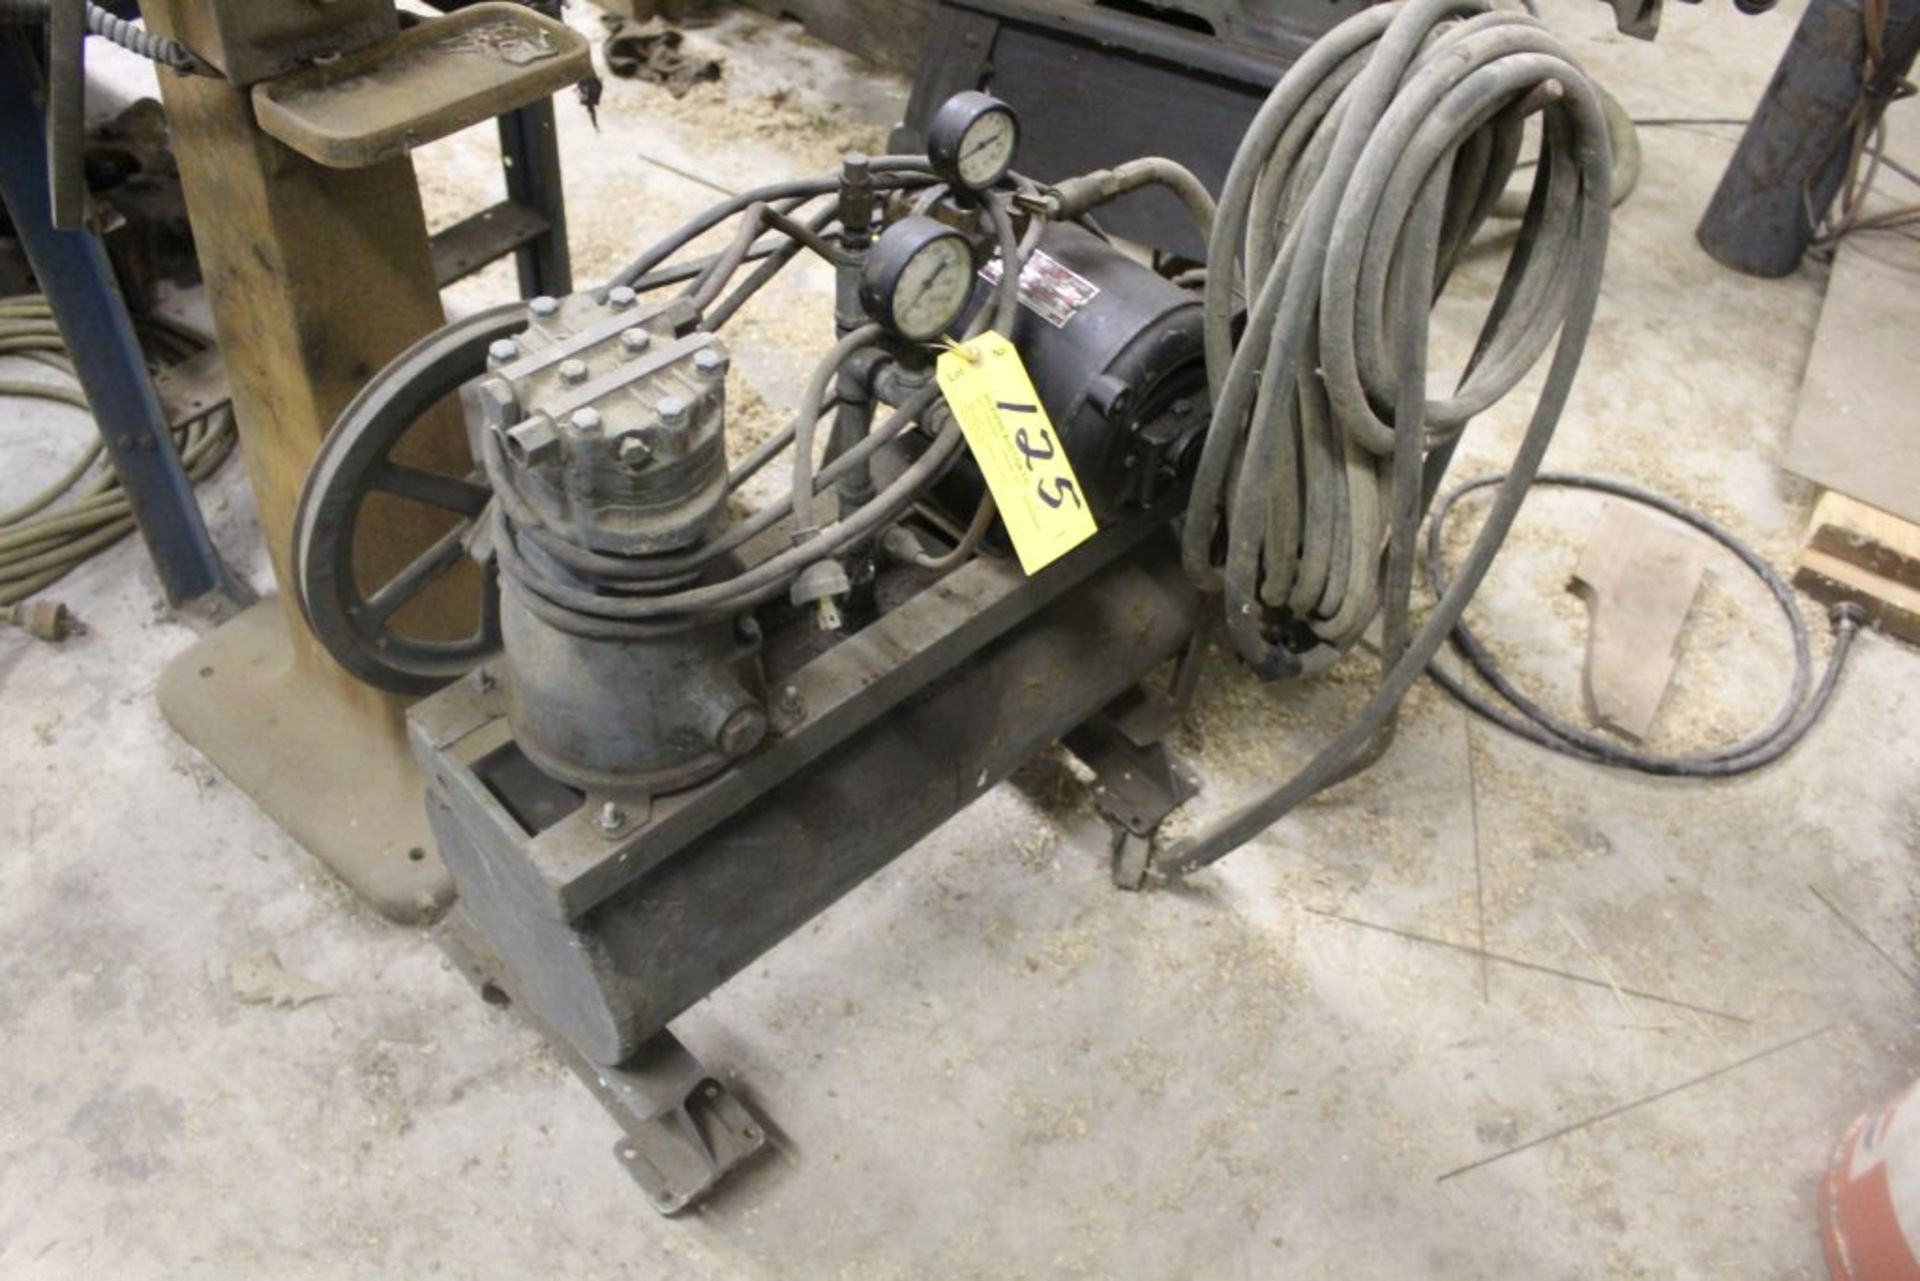 Air compressor, 1/2 HP single cyl., on casters w/hose.